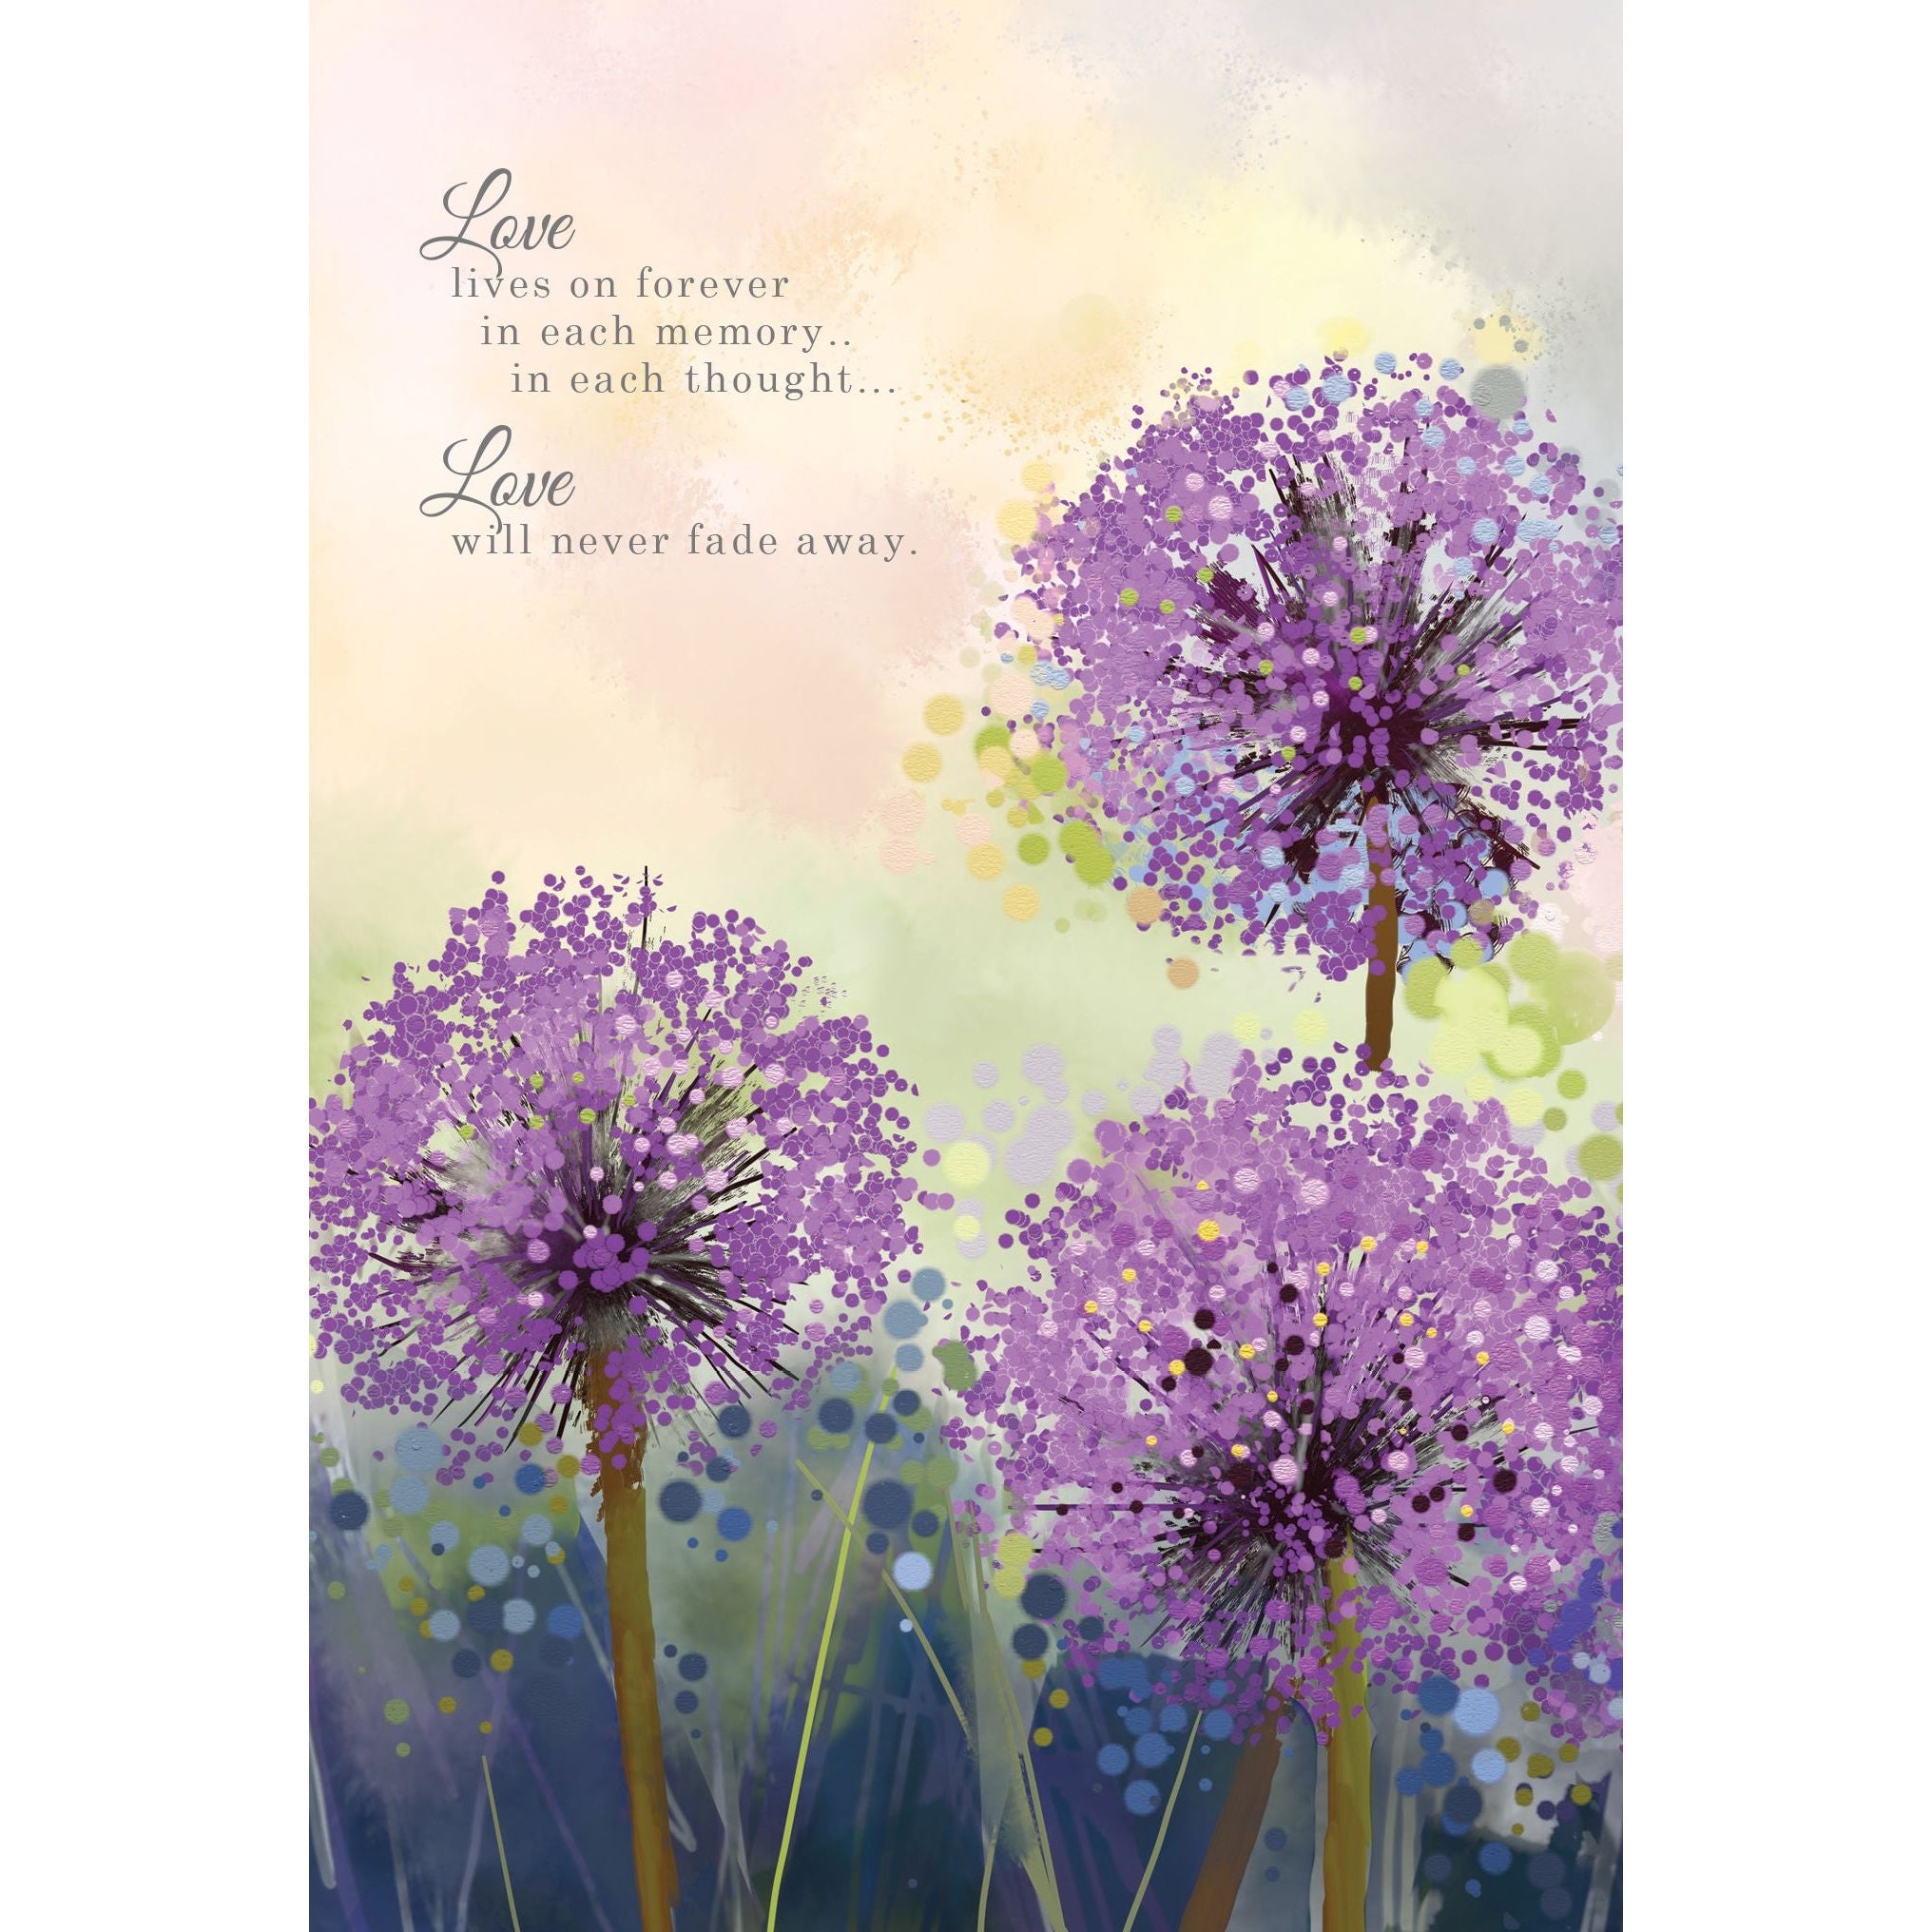 Sympathy Card Love lives forever in hearts - Cardmore